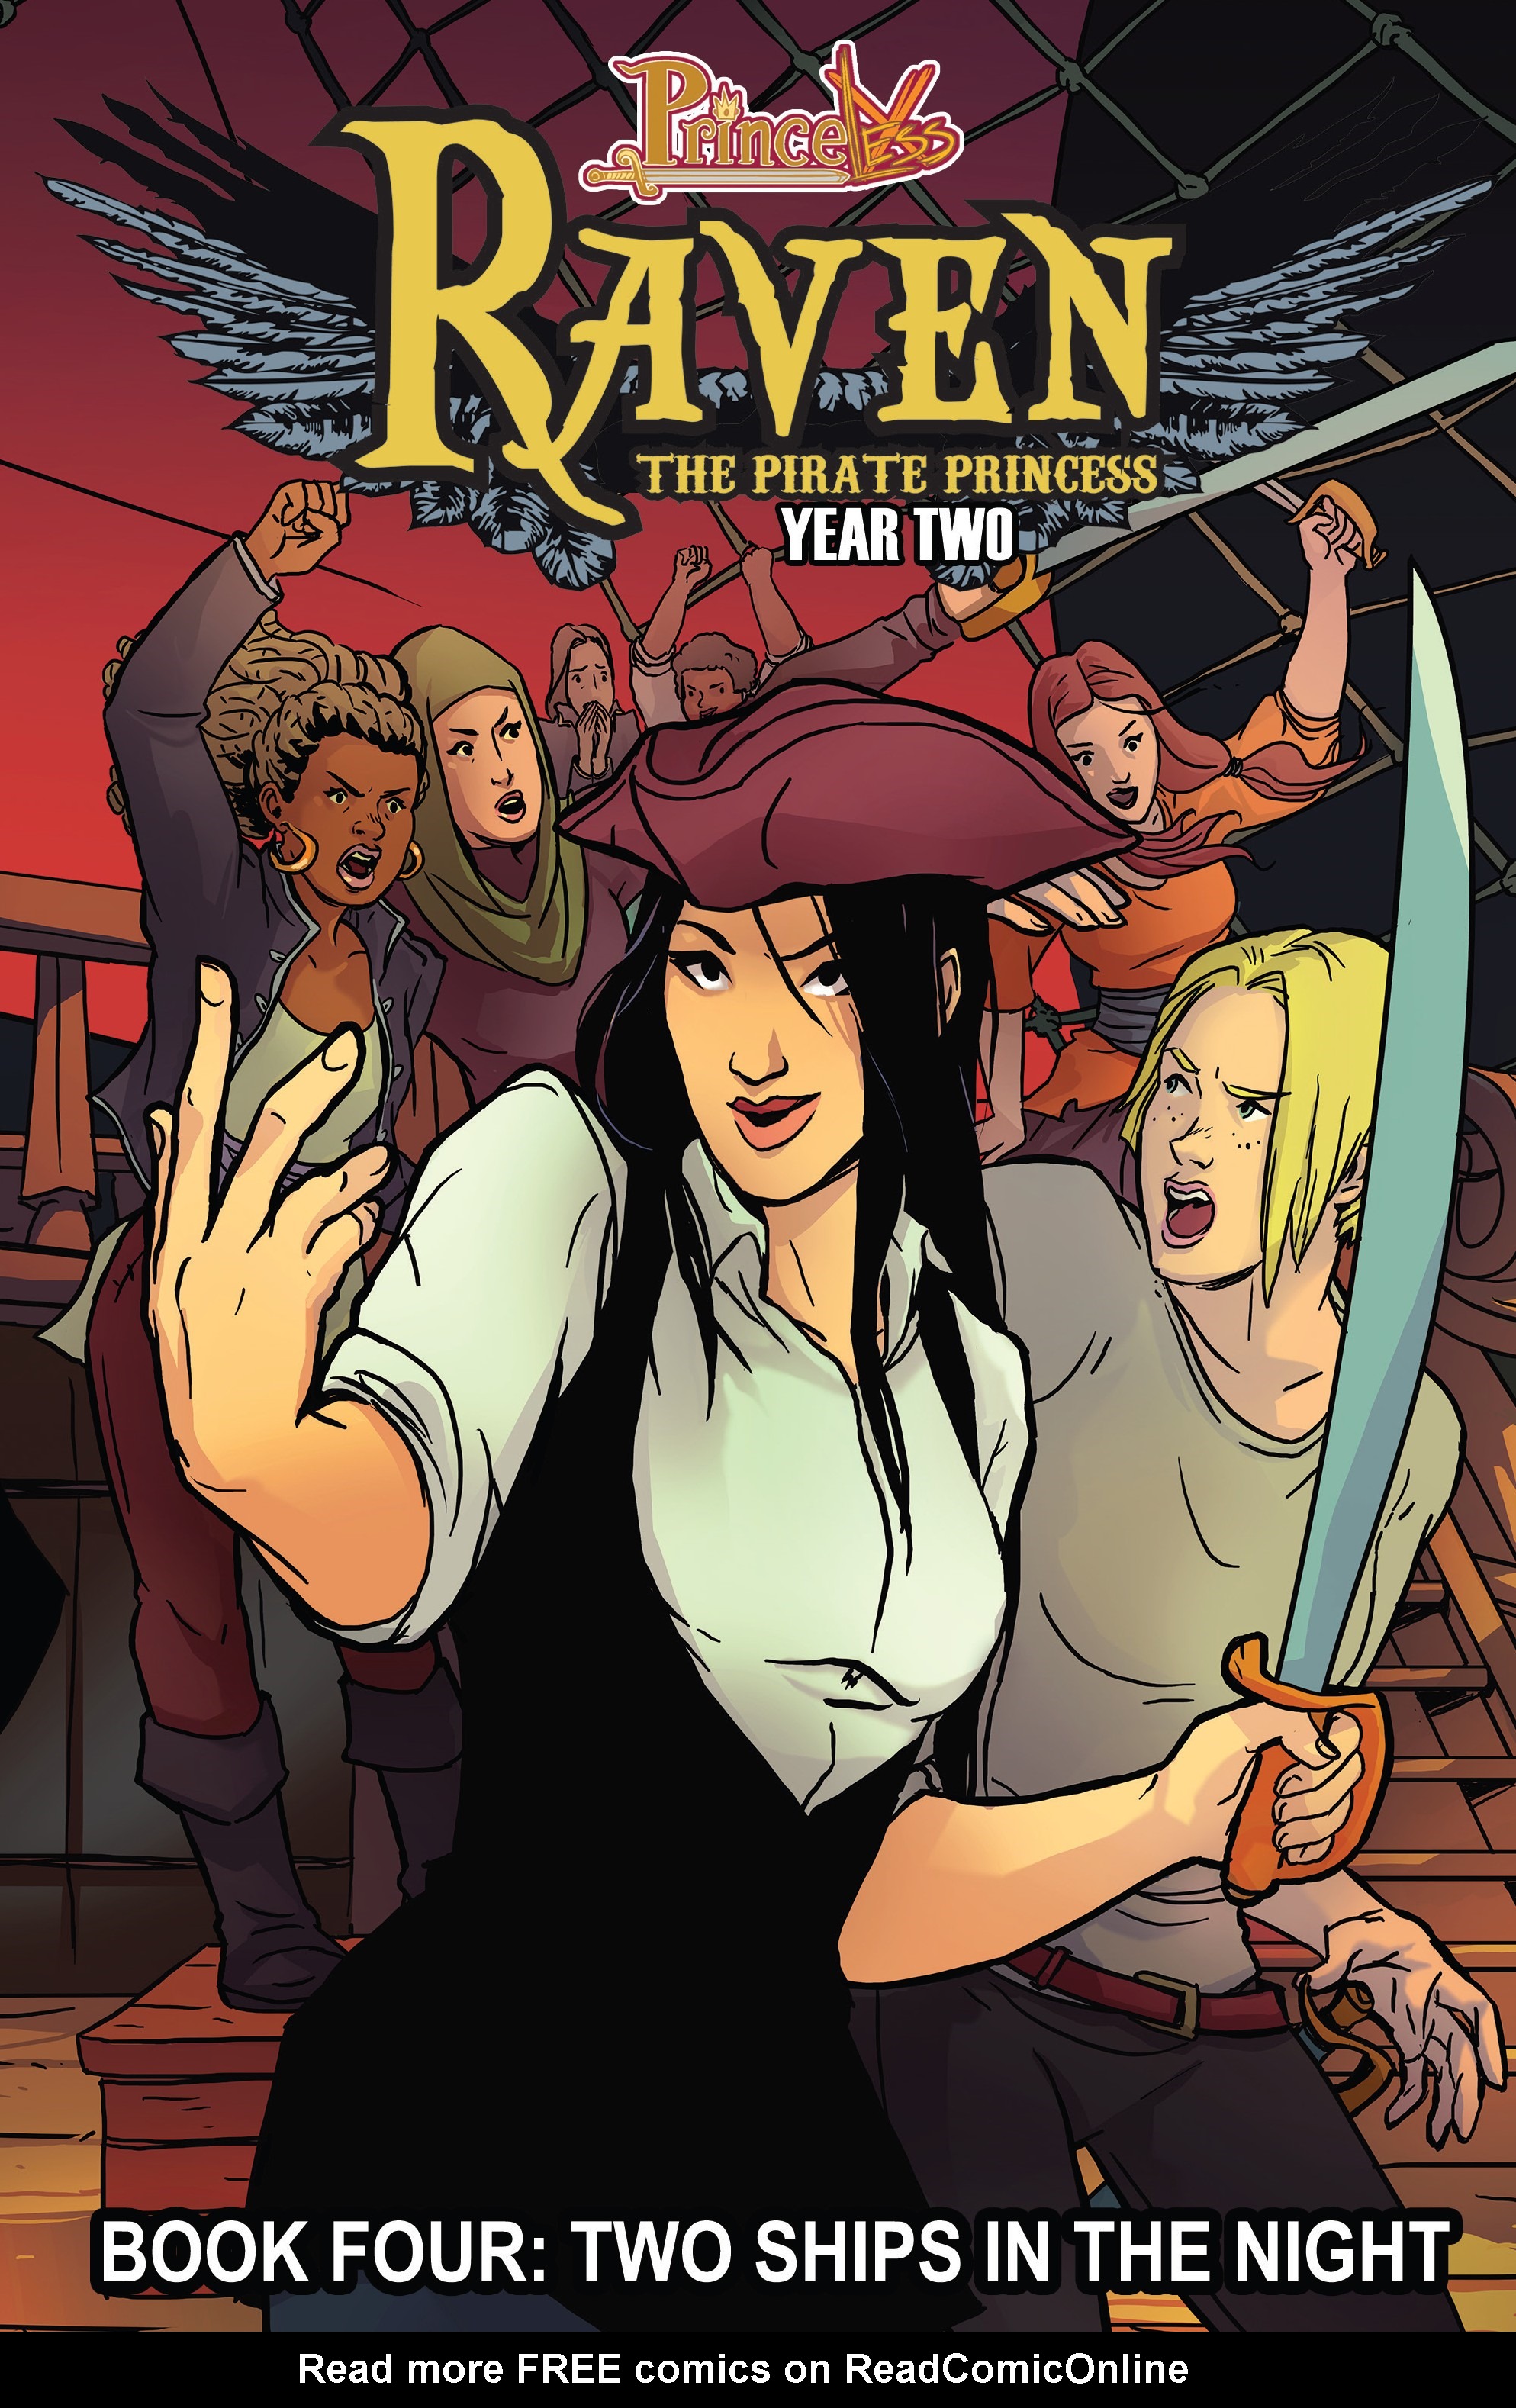 Read online Princeless Raven Year Two: Love and Revenge comic -  Issue # _TPB Two Ships In the Night - 1